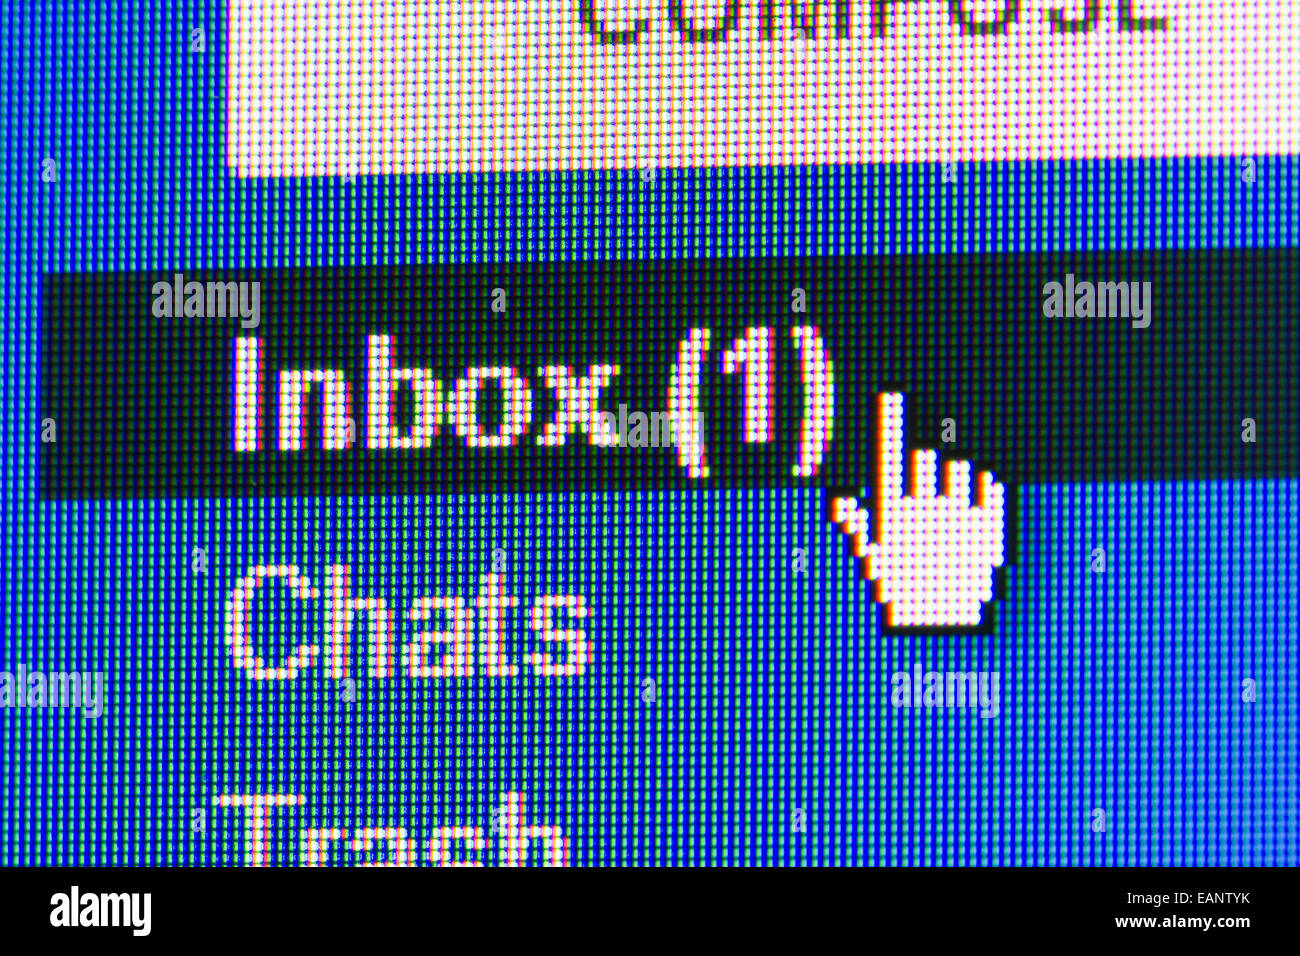 New message in mailbox. Macro screen view of old monitor. Stock Photo